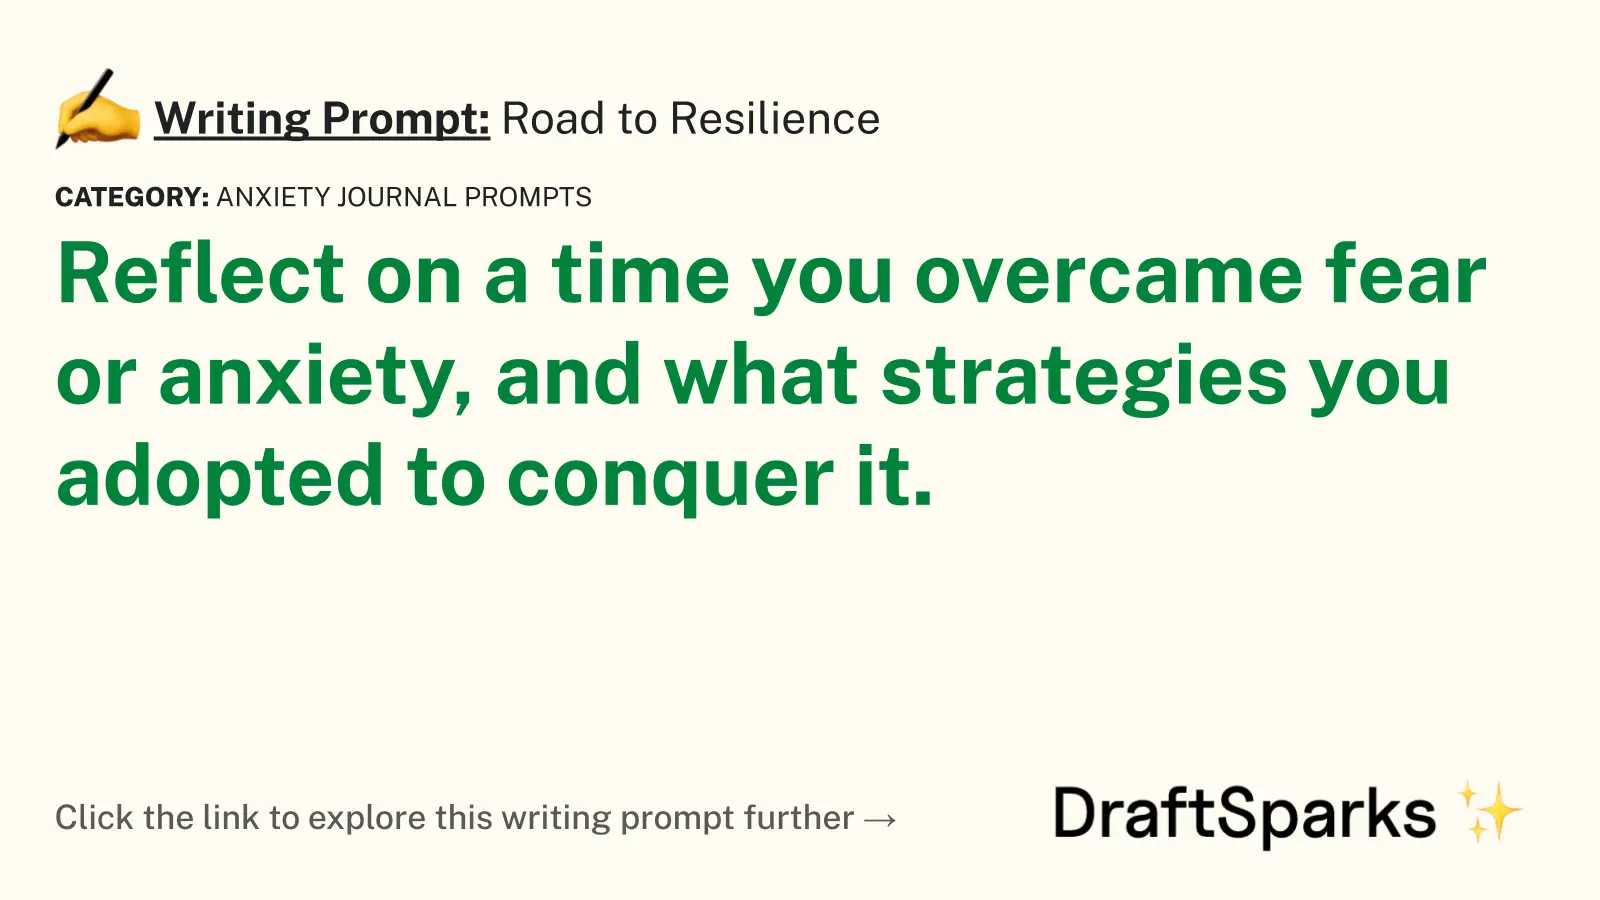 Road to Resilience